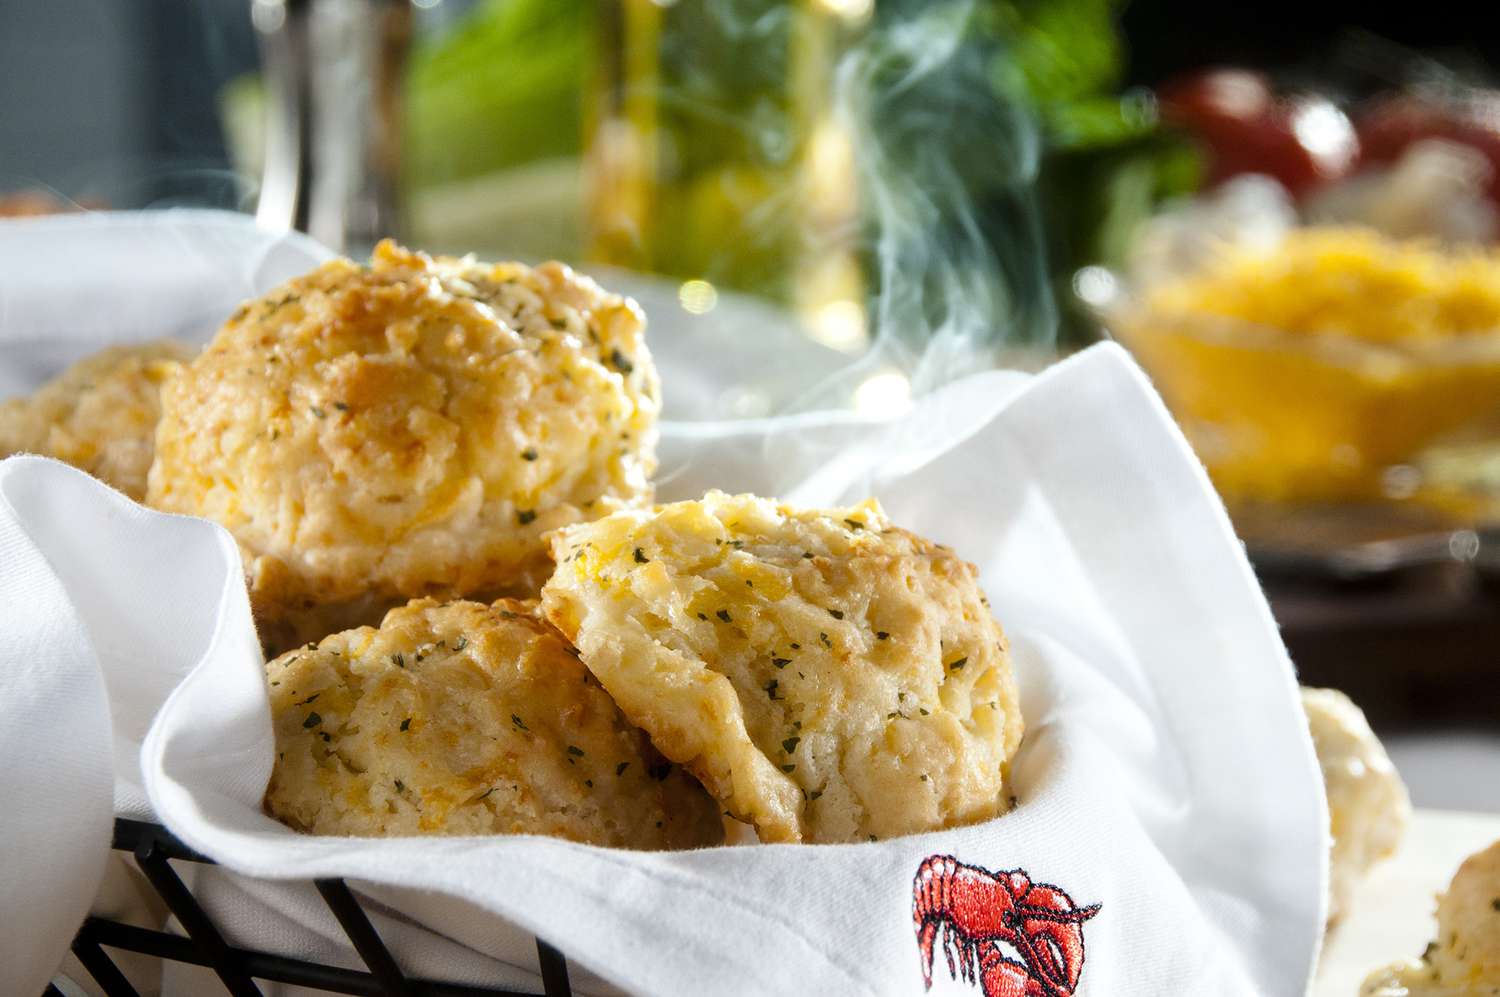 F:PHOTOReady RoomActionsInsert Request48126#Red LobsterCheddar_Bay_BIscuits_HOH1.jpg